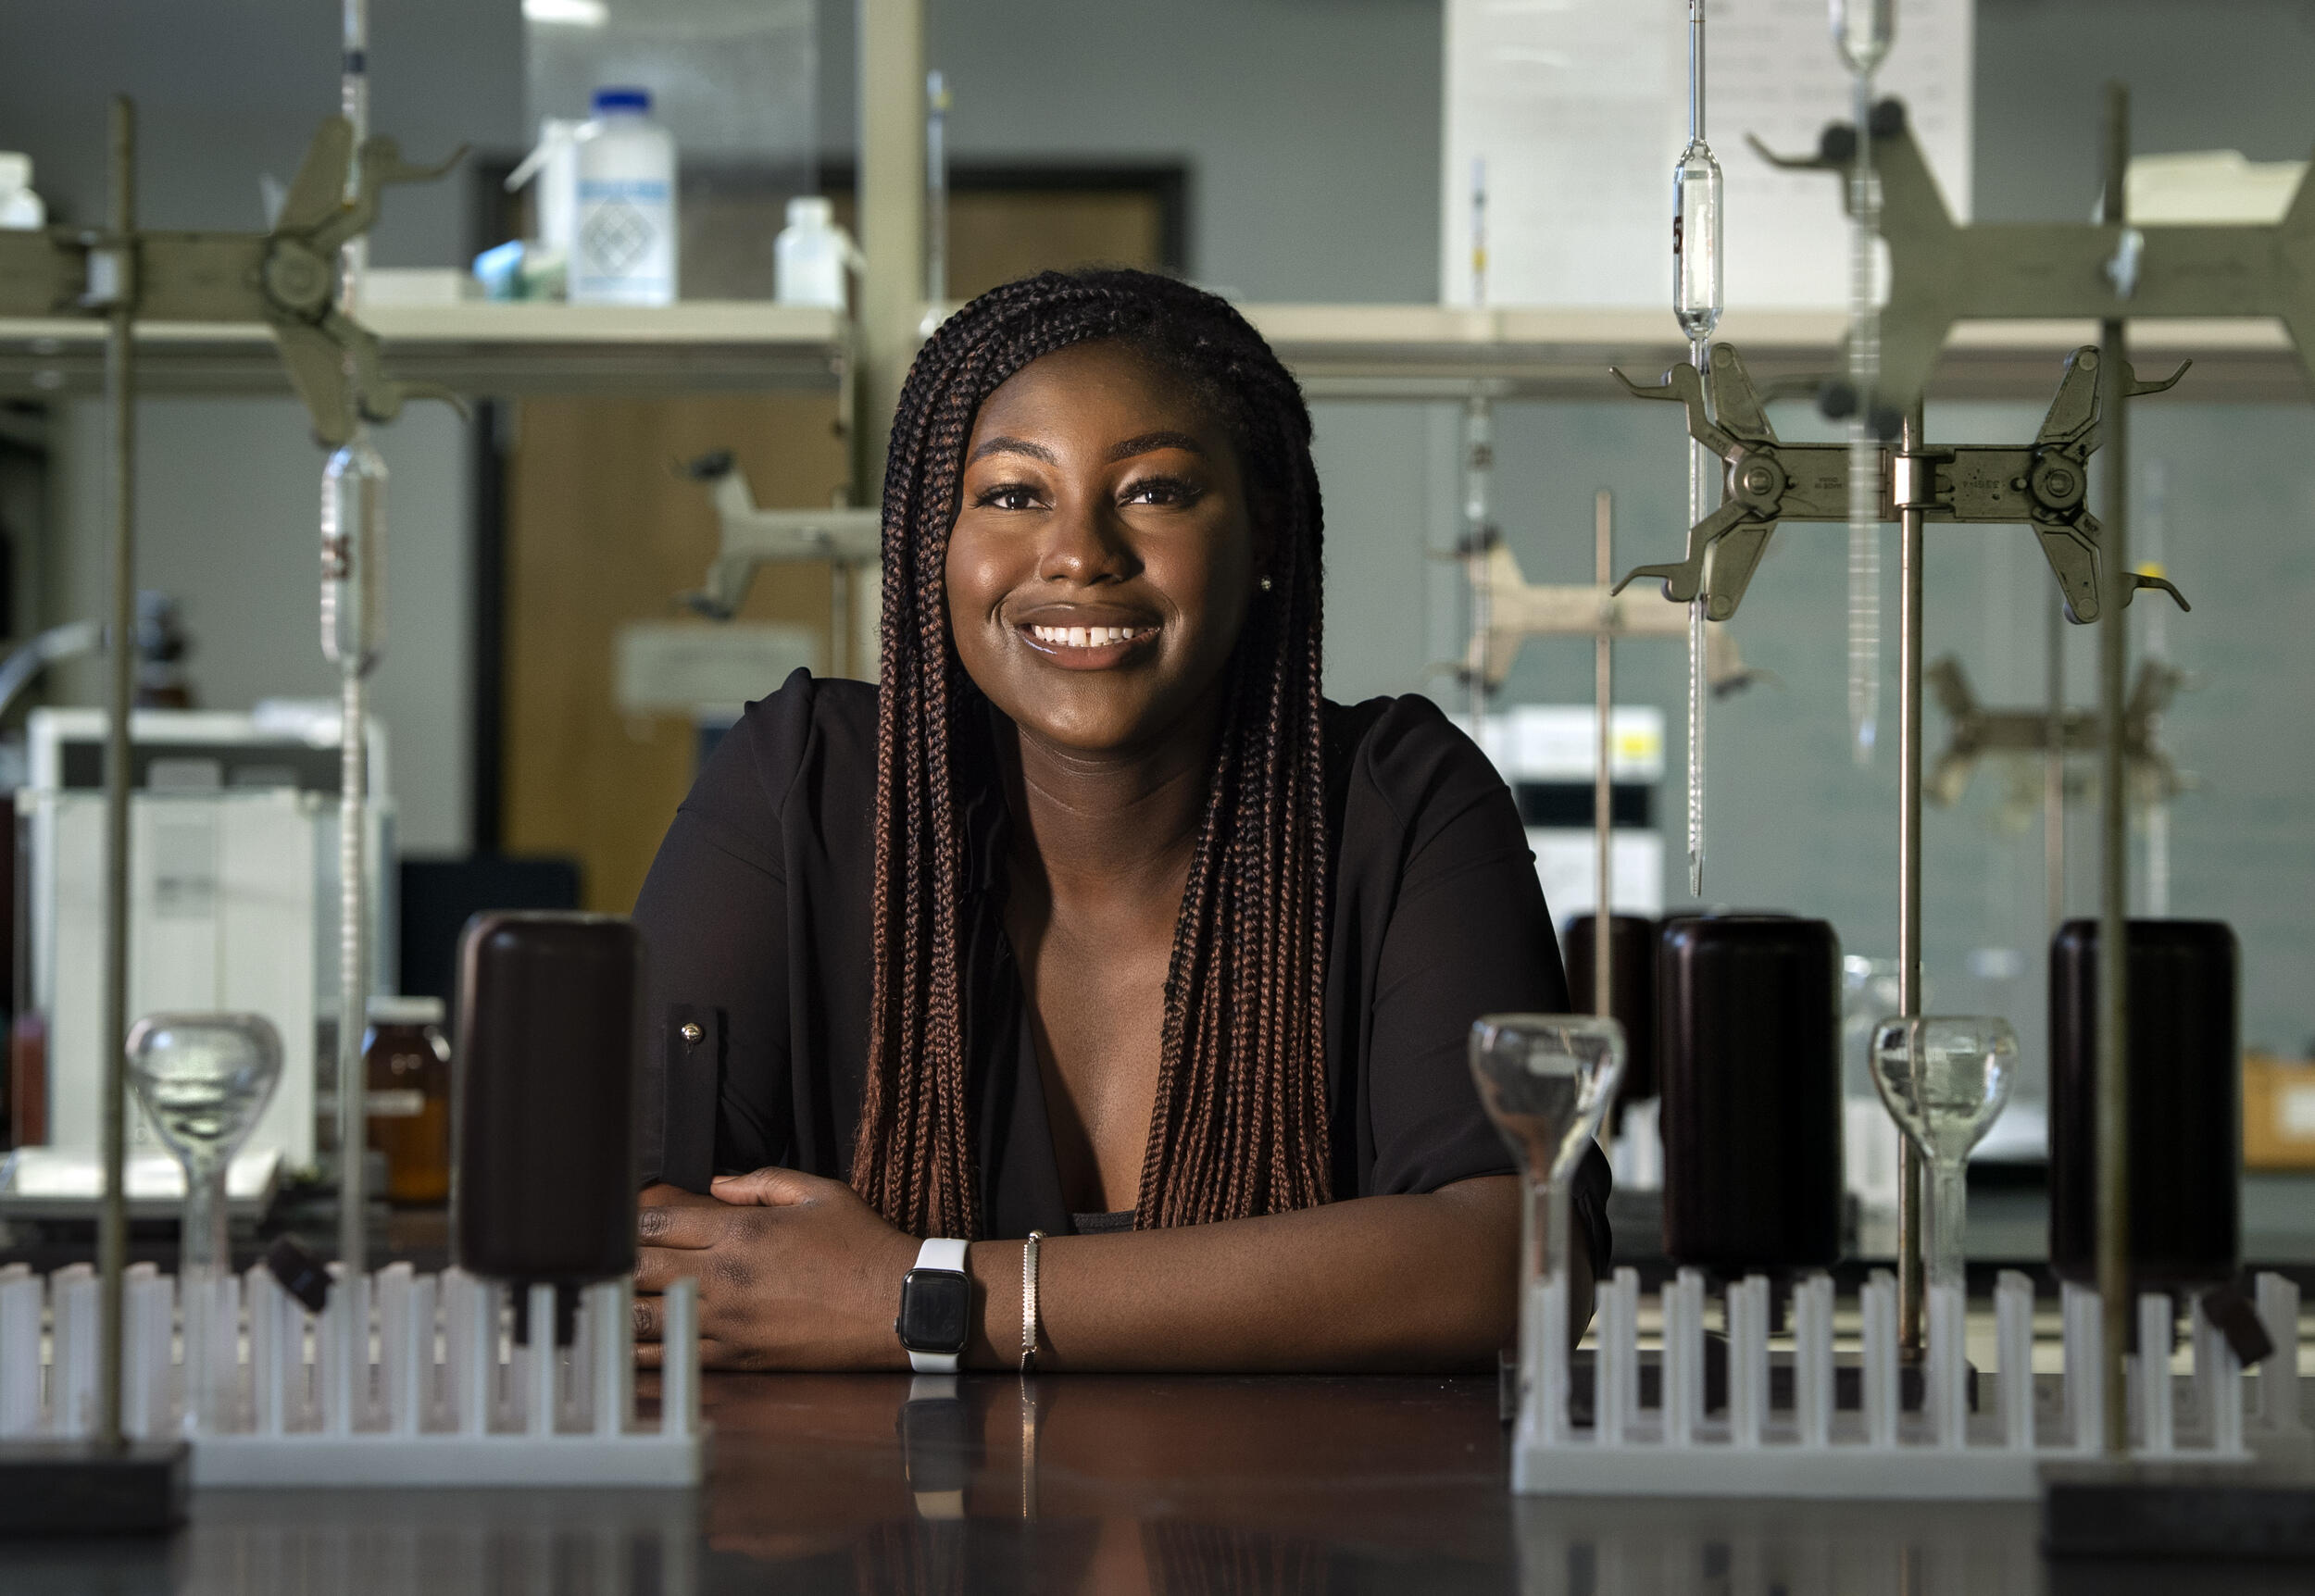 A woman smiling resting her arms on a table. All around her is scientific equipment